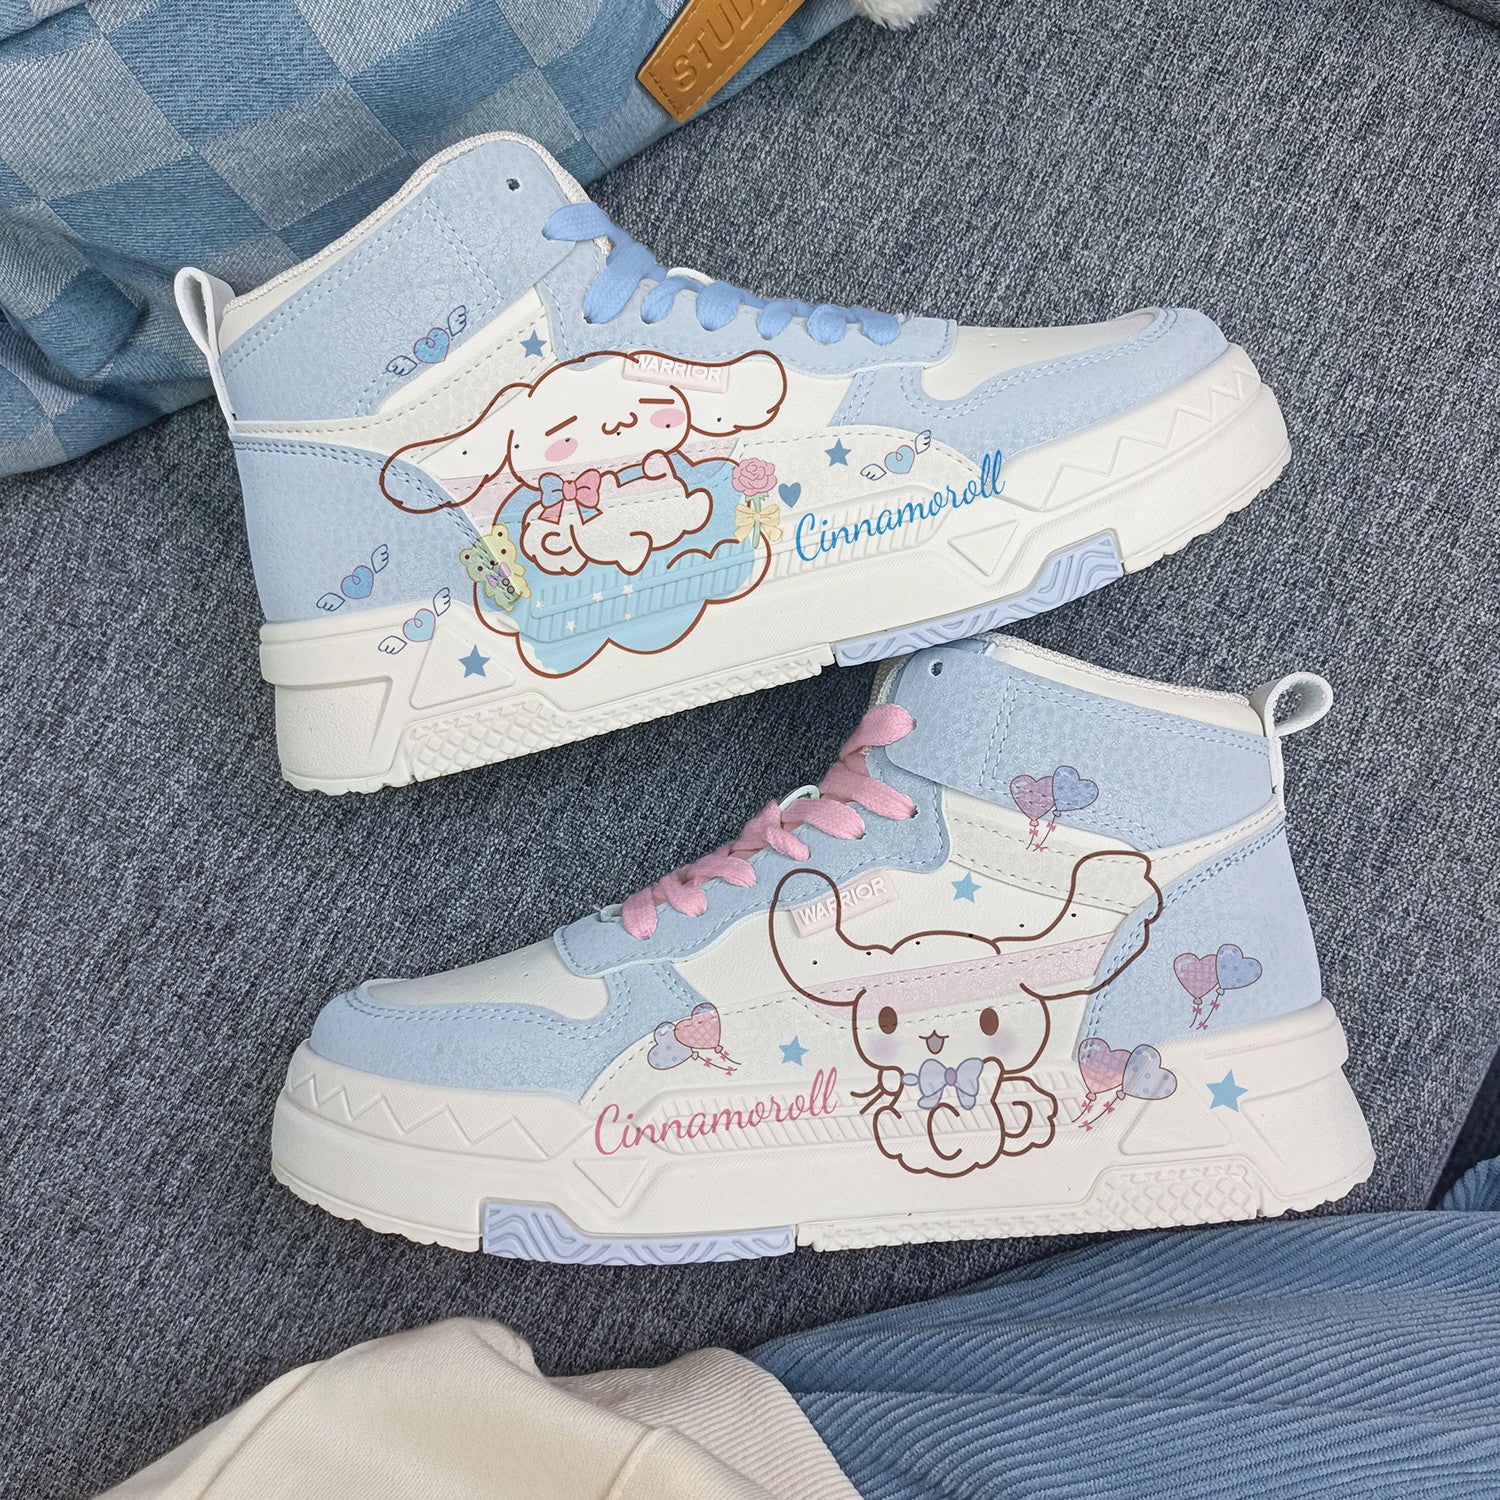 Anime Shoes Drawing Online - benim.k12.tr 1695025695